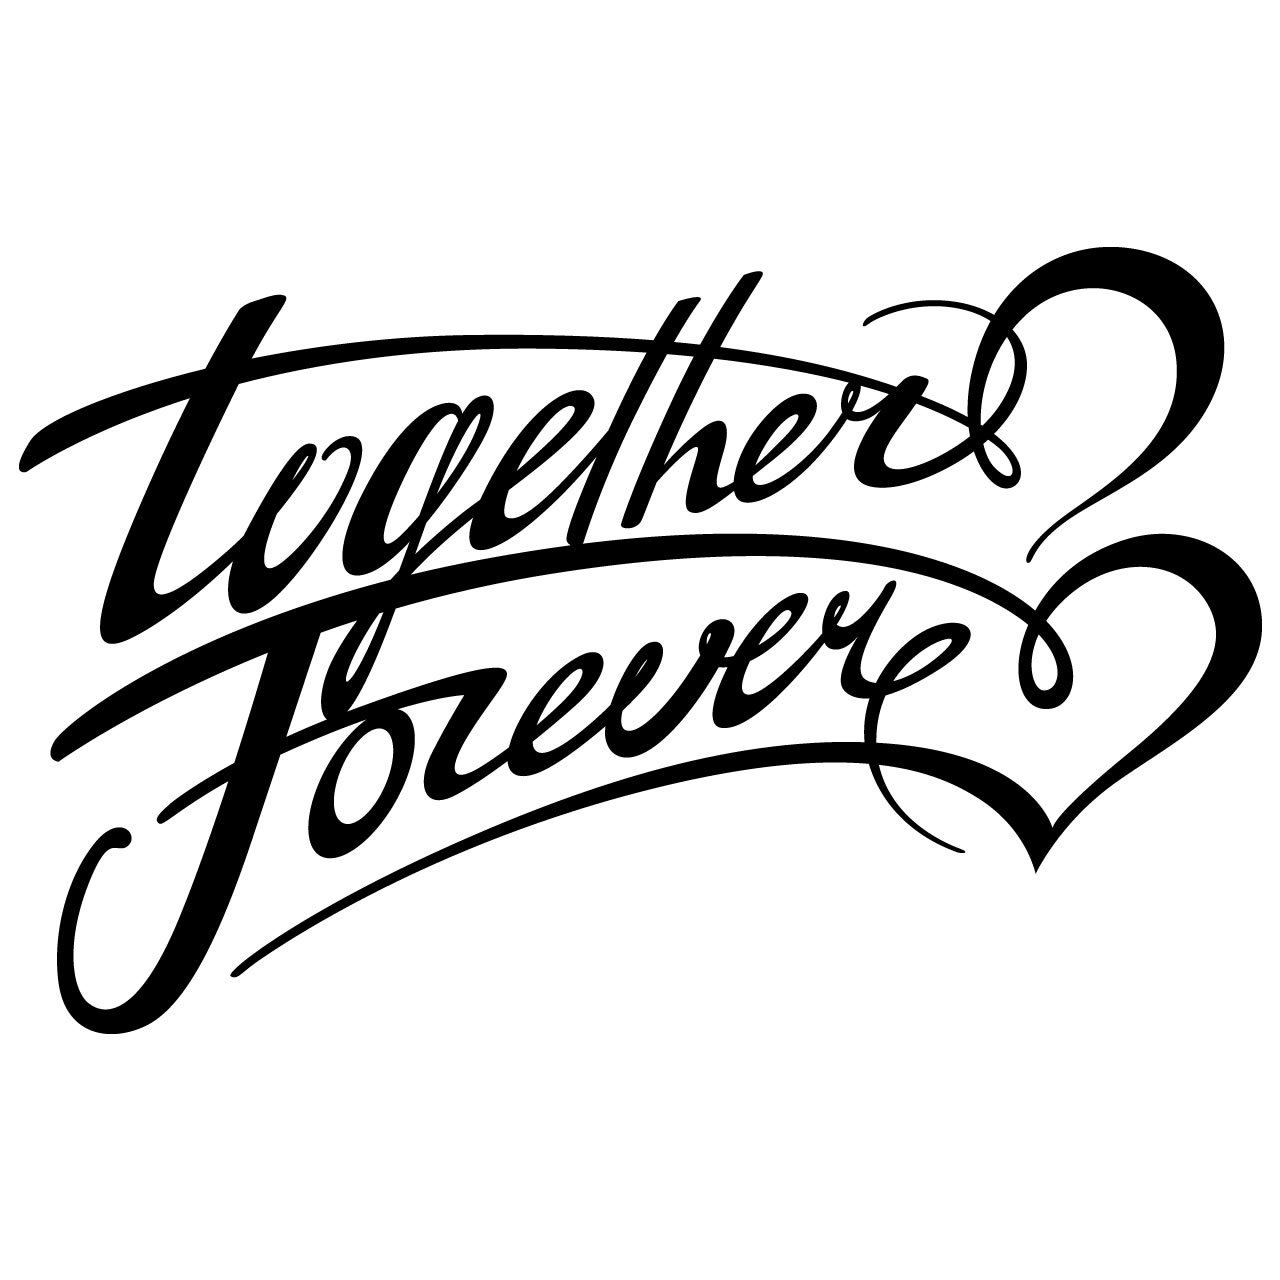 Together Forever красивым шрифтом